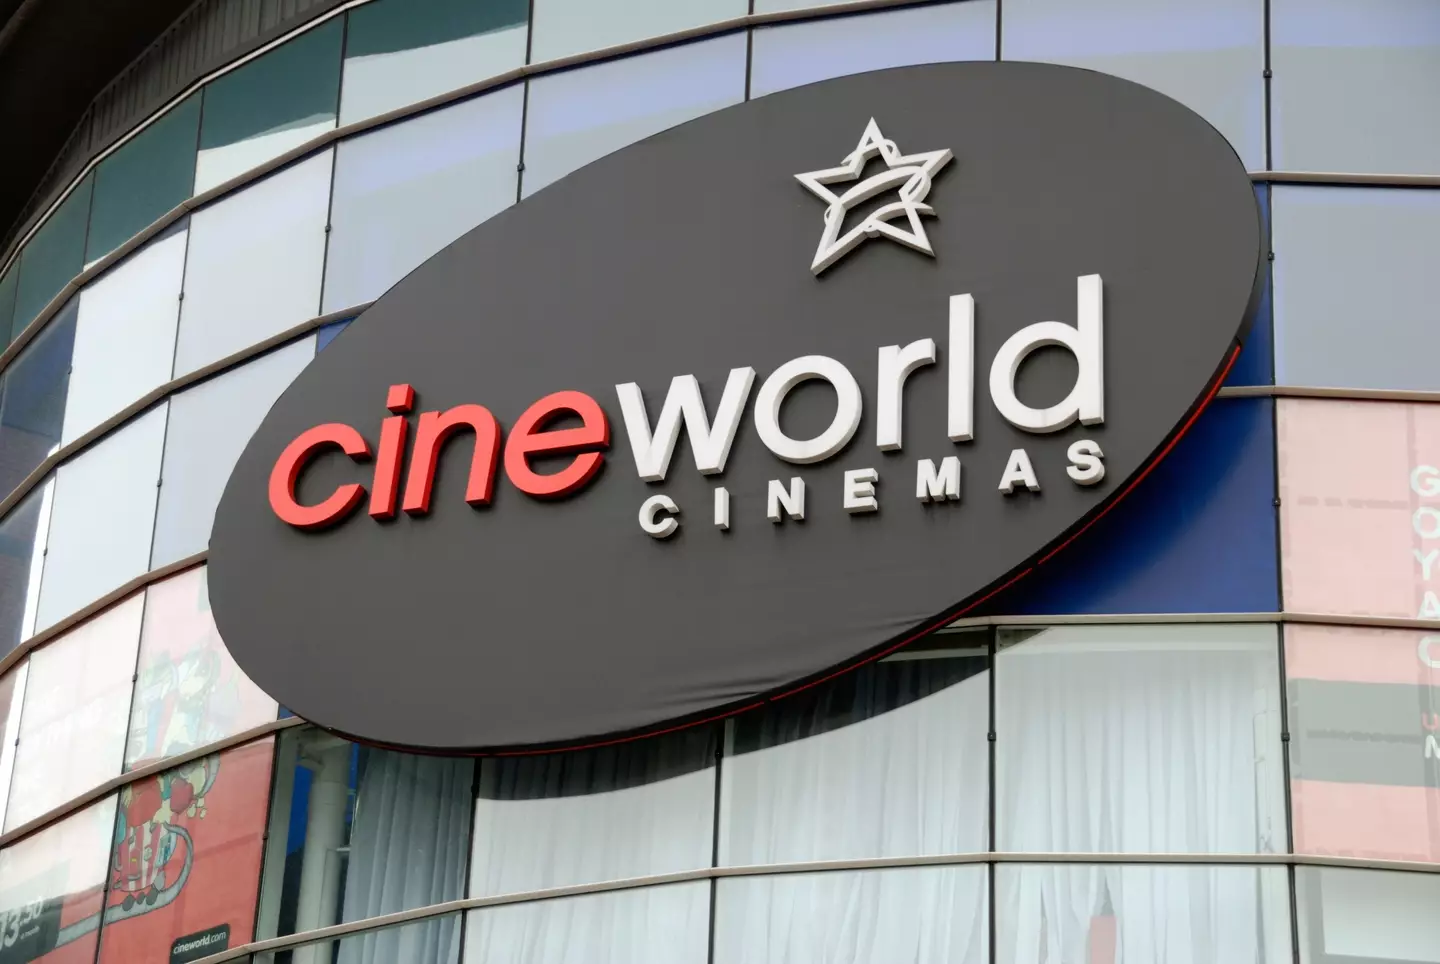 Cineworld has filed for administration.